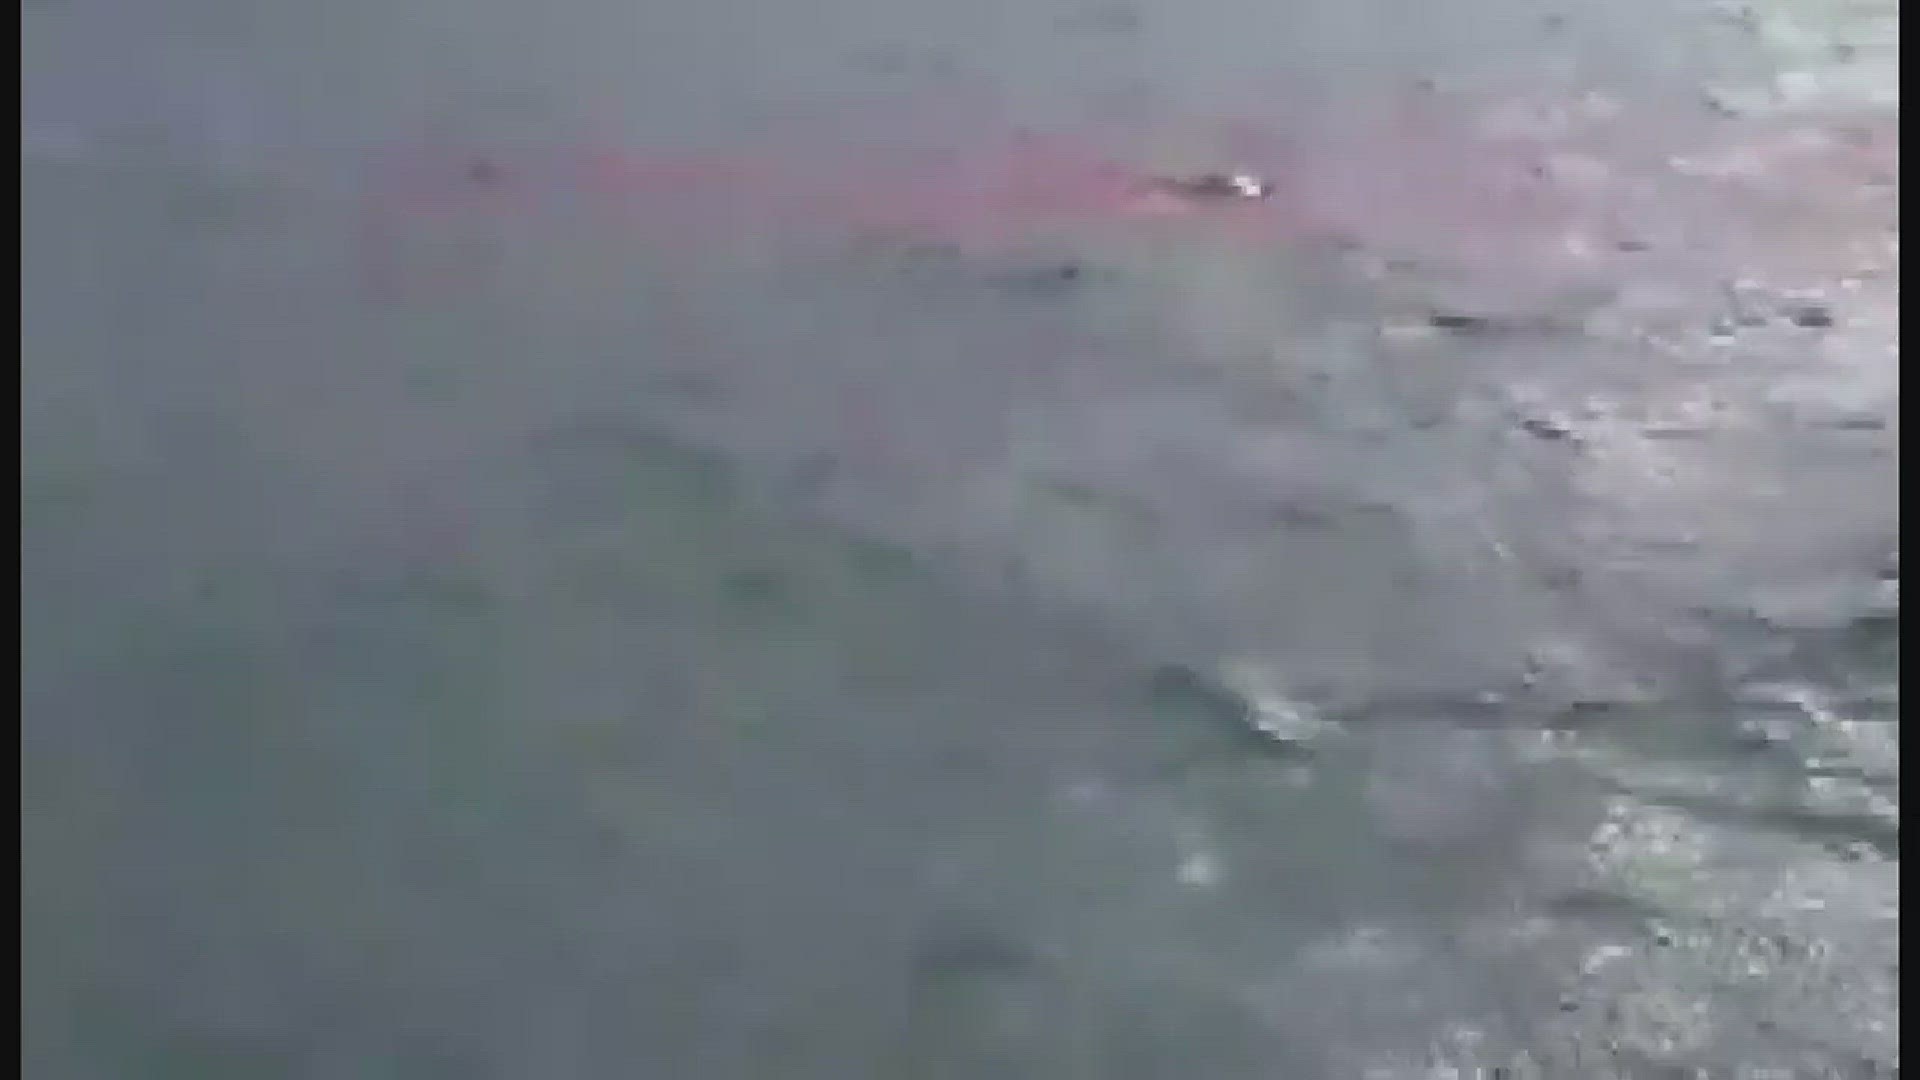 Shark attacking seal in Columbia River